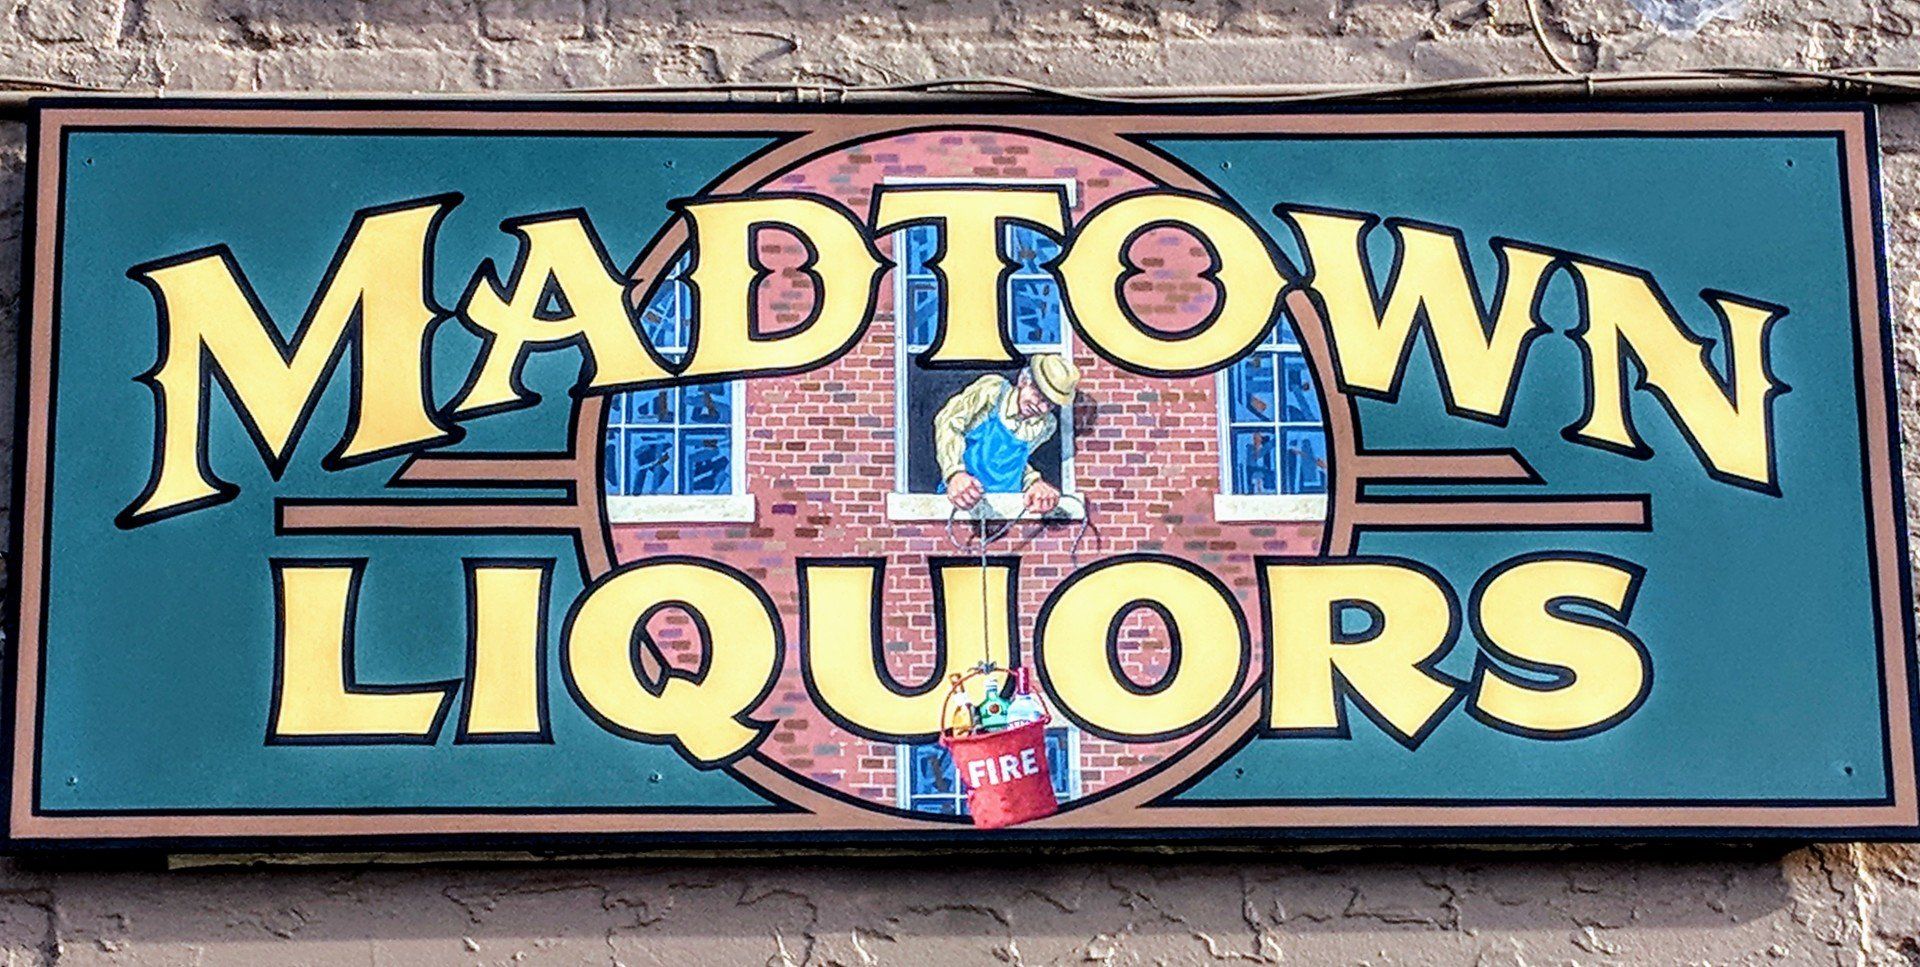 A sign for madtown liquors hangs on a brick wall